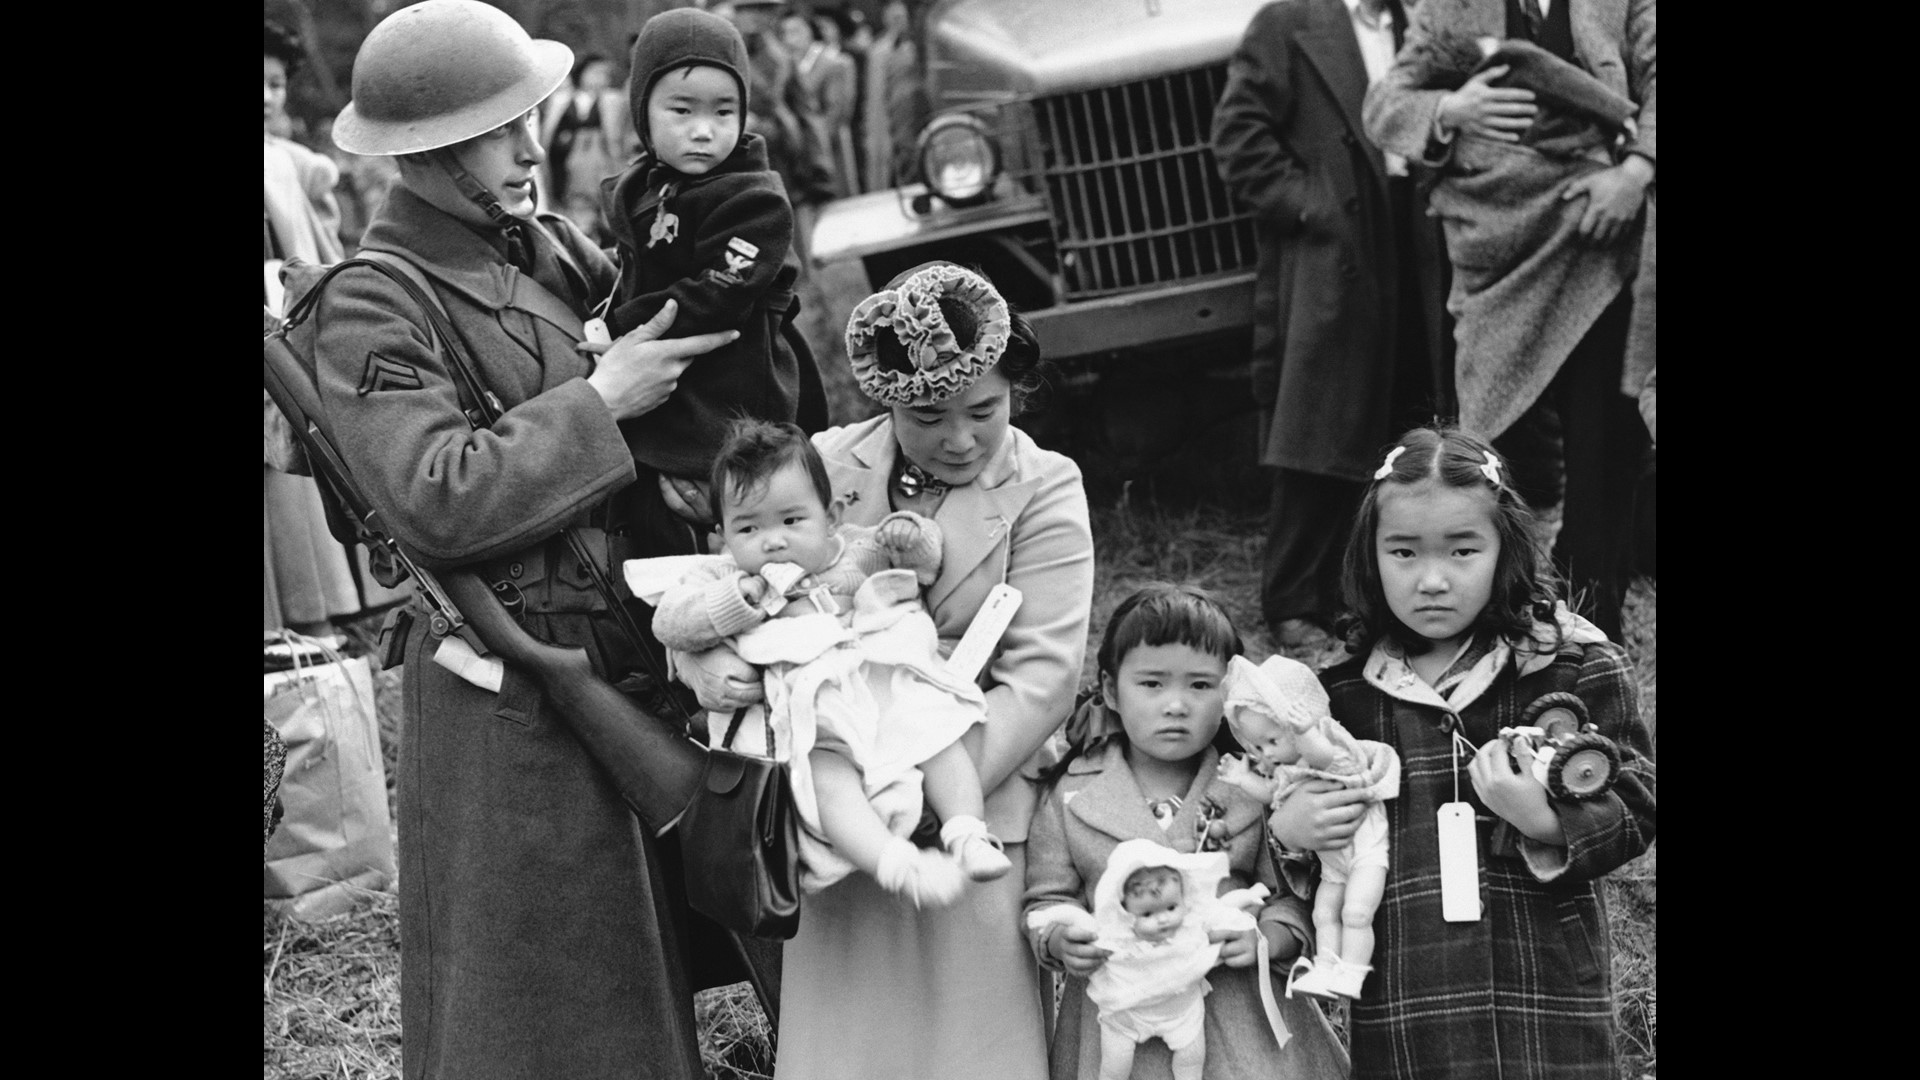 Did you know that the U.S. paid Japanese Americans $20,000 as reparations for interning them in camps during World War II?